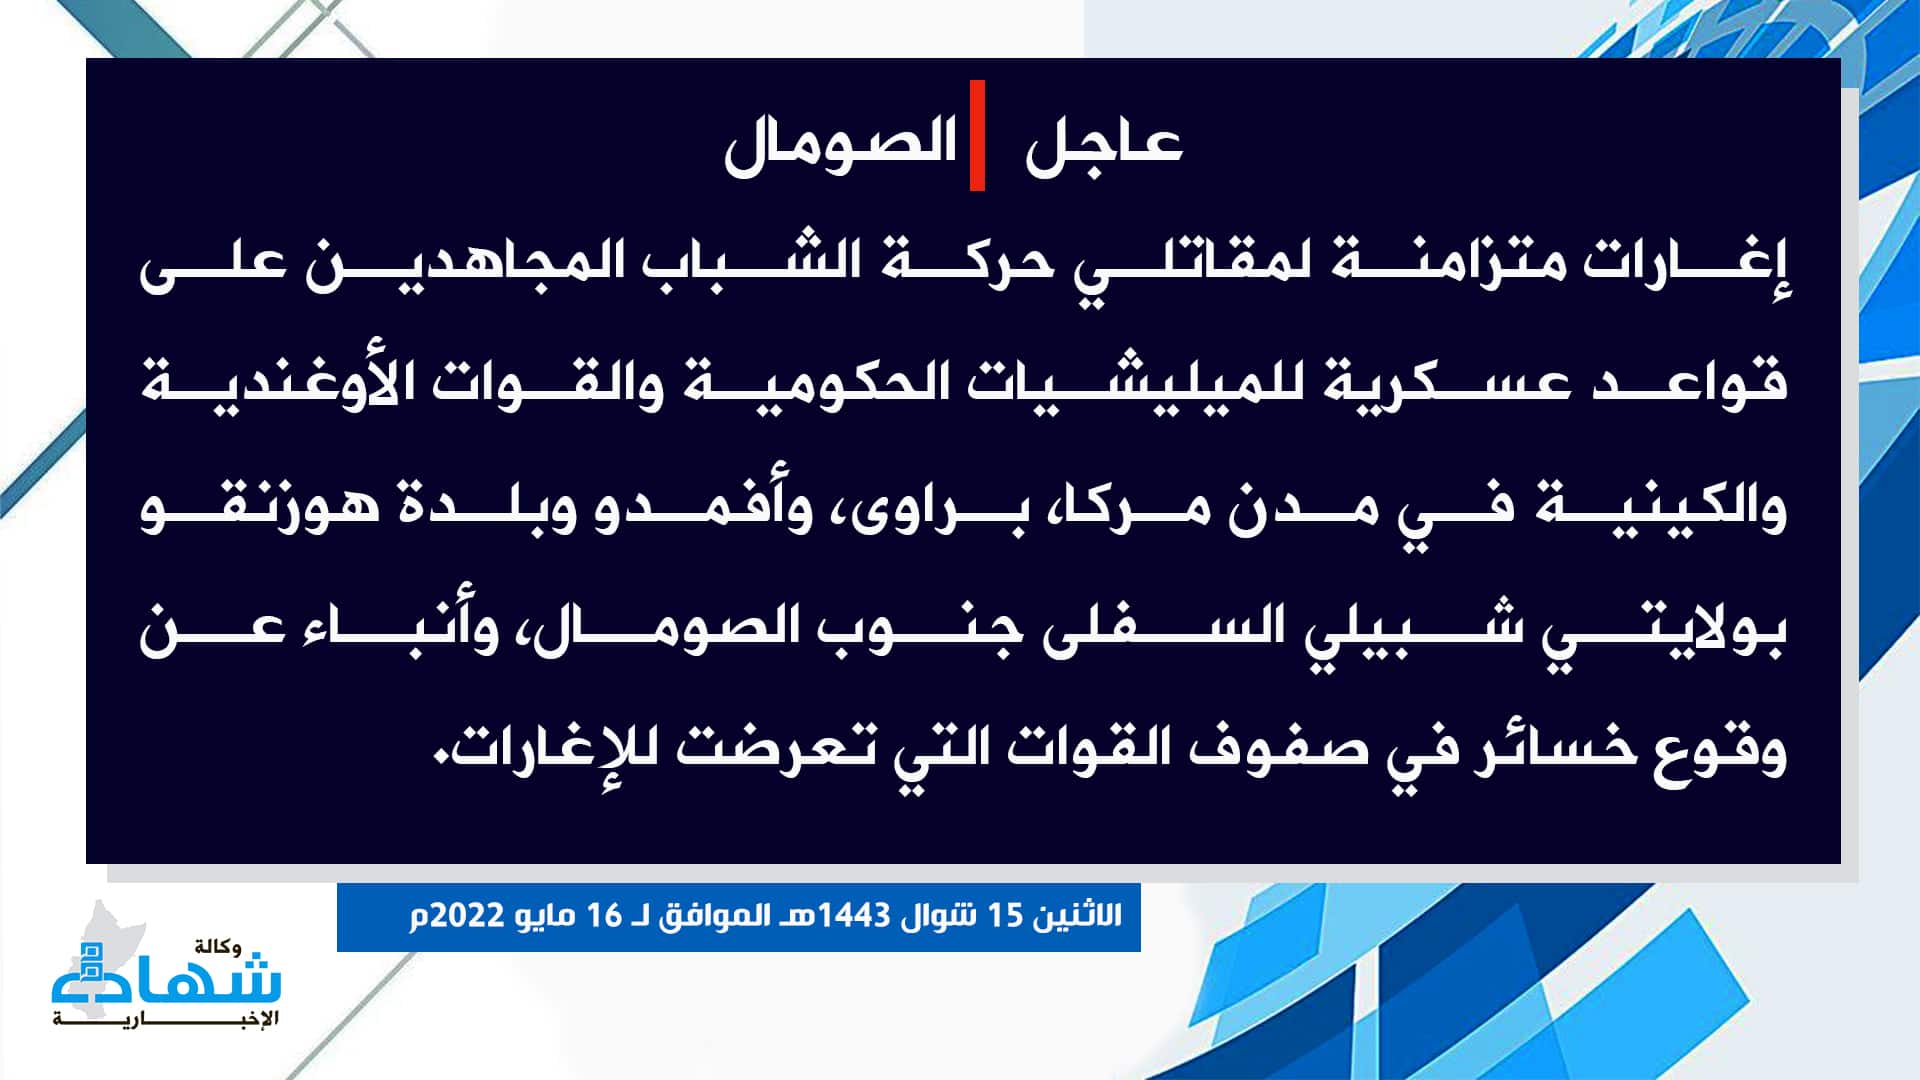 (Claim) al-Shabaab: Mujahideen Attacked Somalian, Ugandan and Kenyan Military Bases in Marka, Barawi and Afmdow Cities and Hozingow Town in Lower Shabelle State, Southern Somalia - 16 May 2022